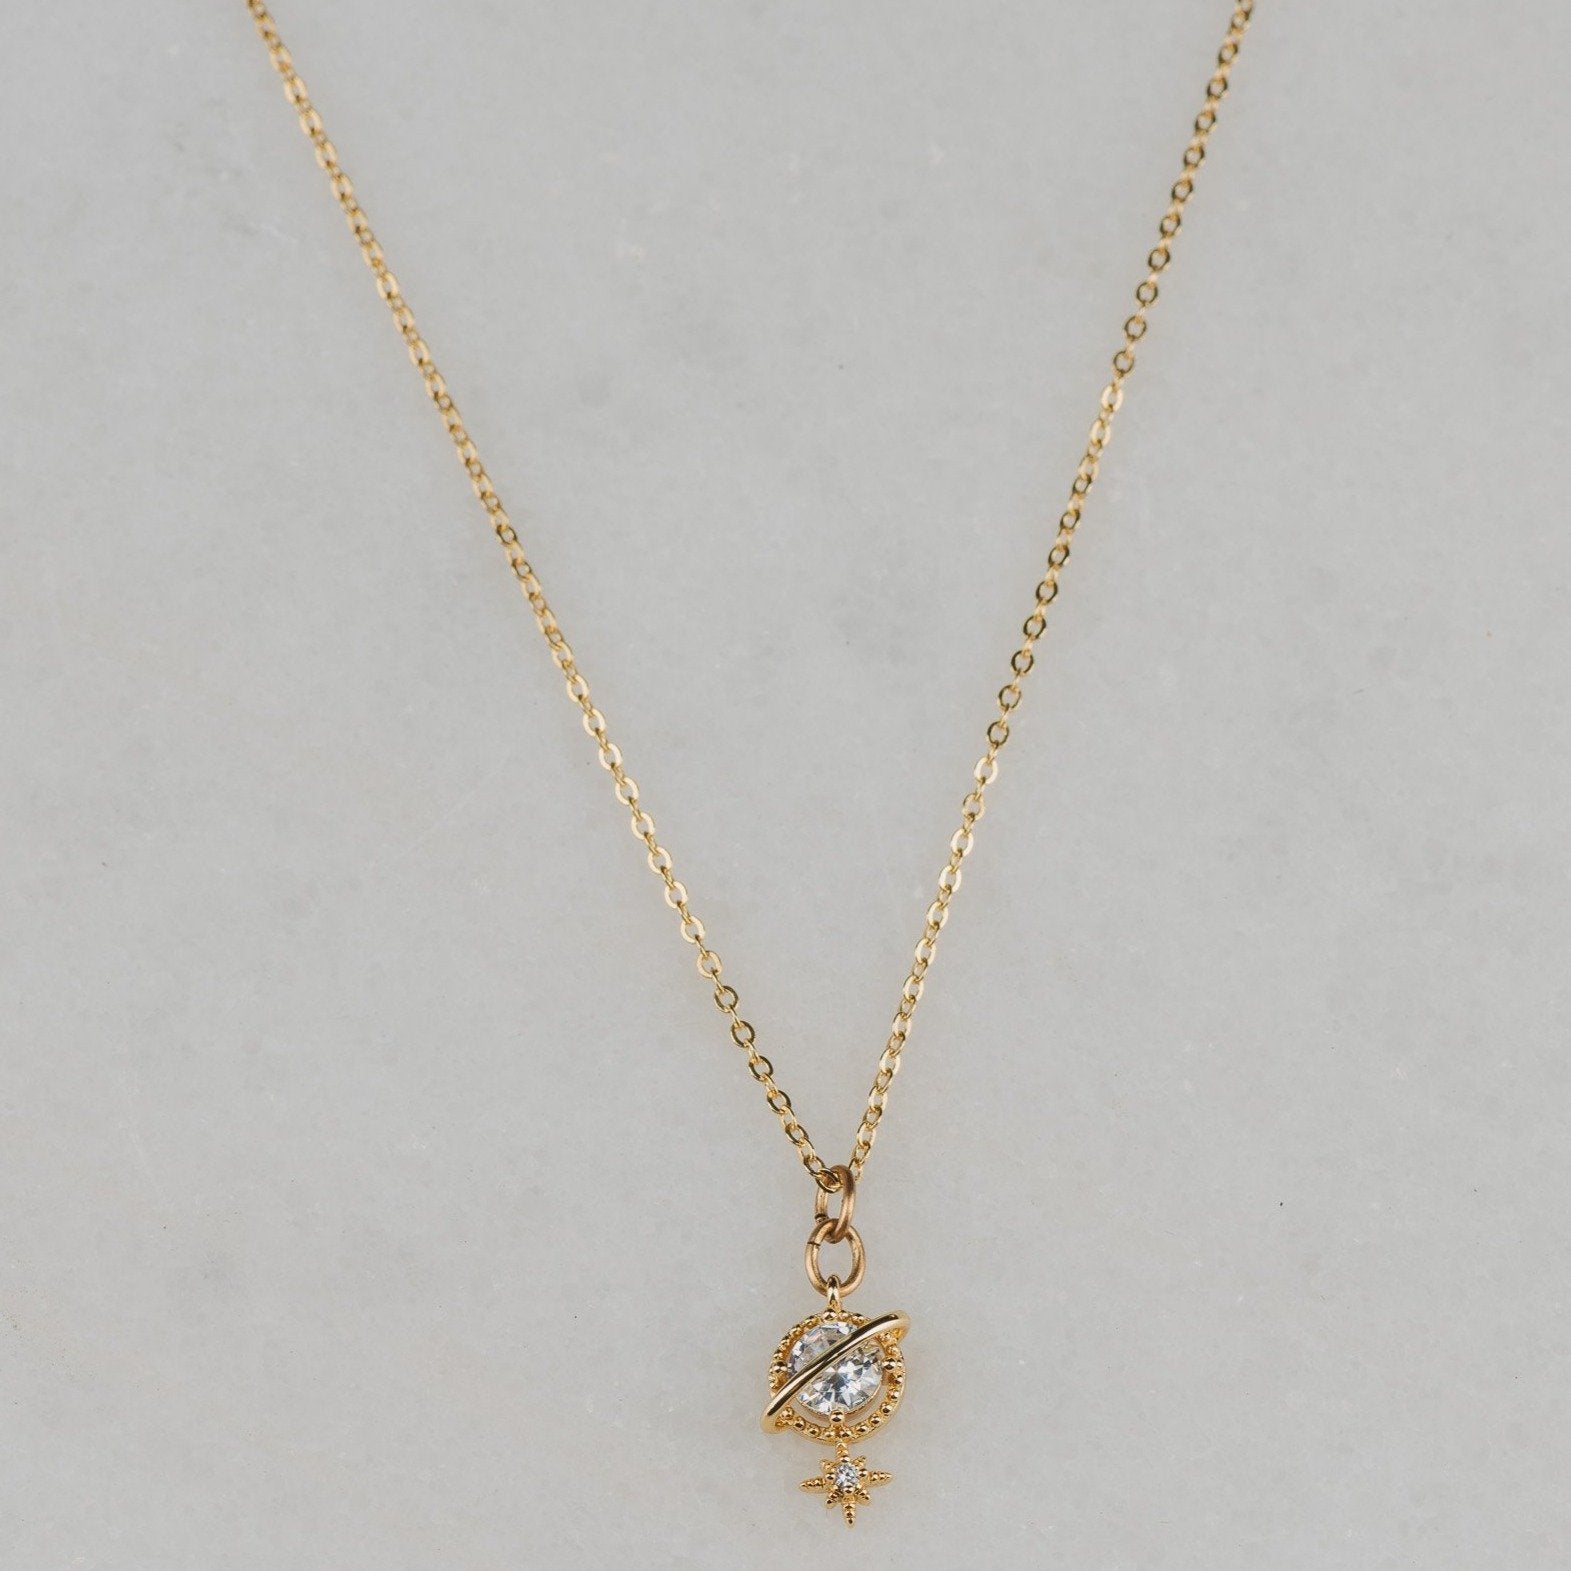 Infinite Gold necklace